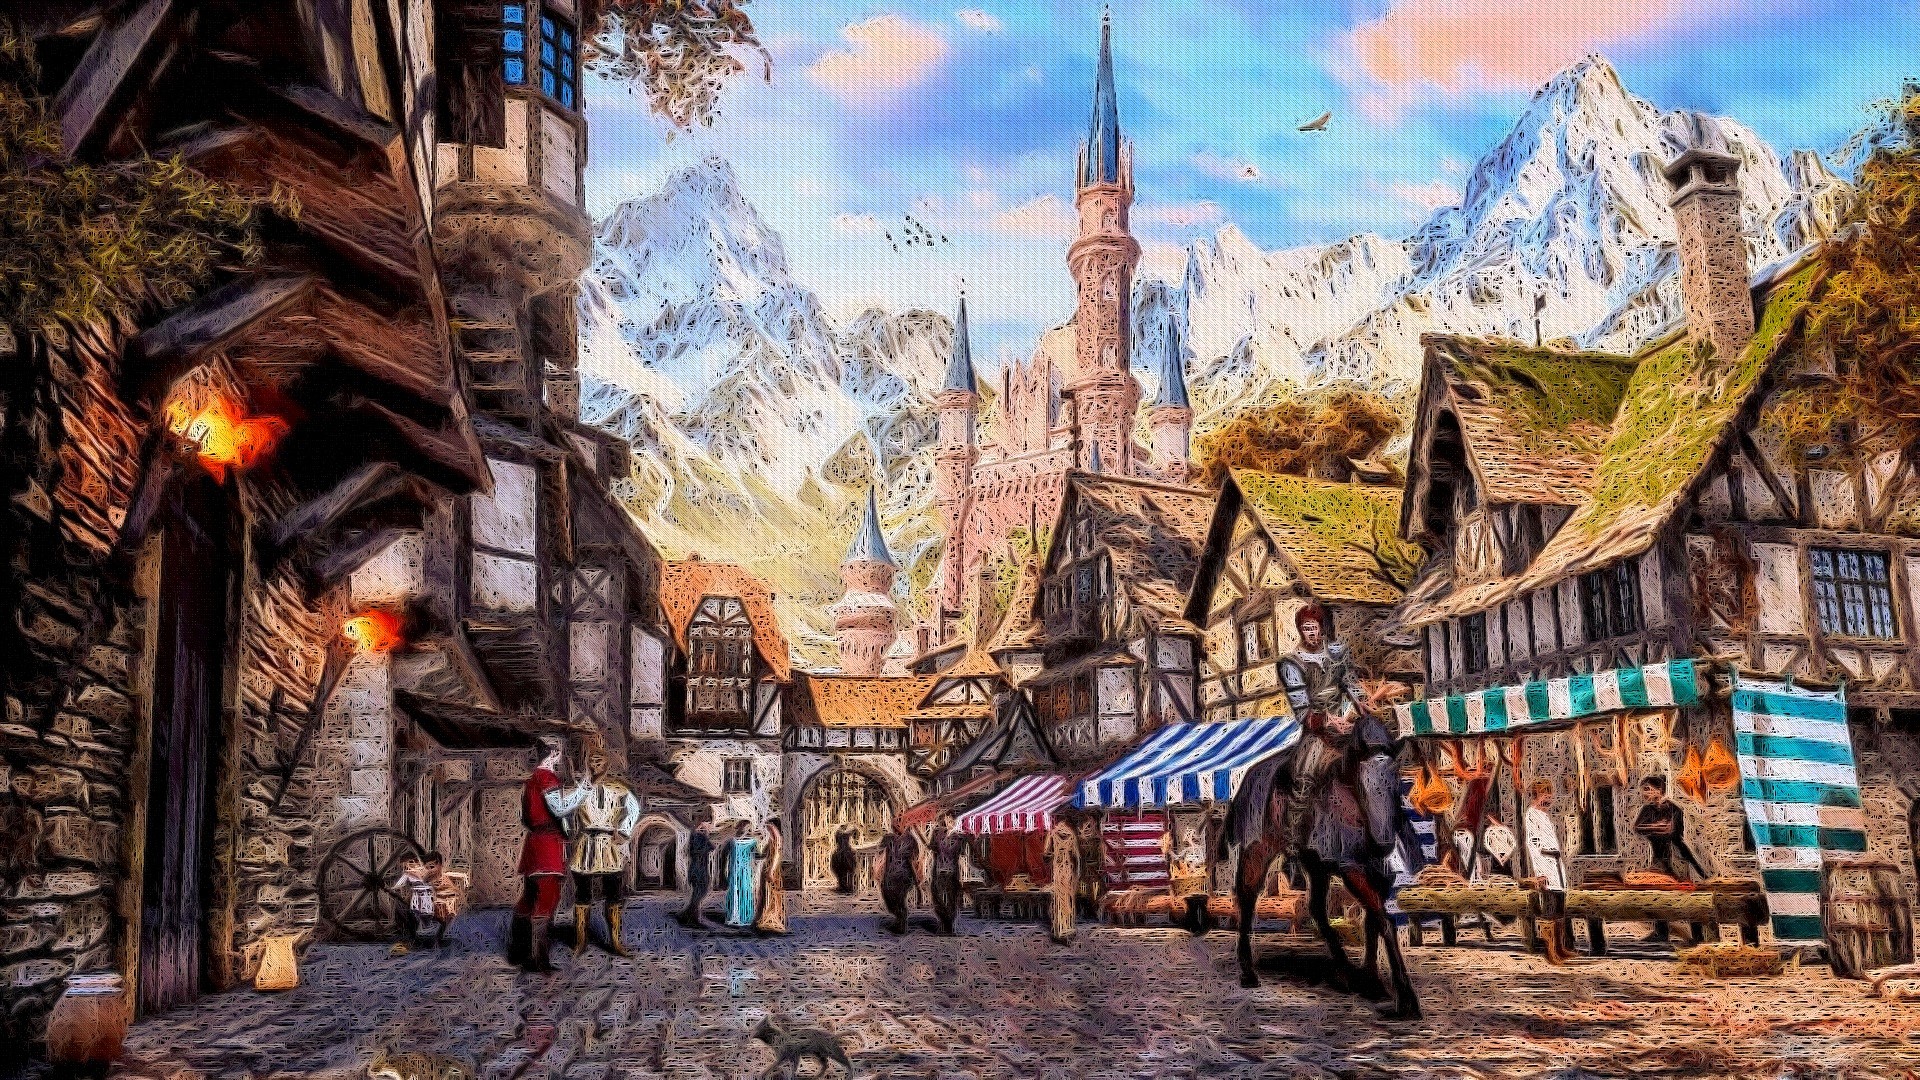 artistic, painting, awning, house, market, mountain, town